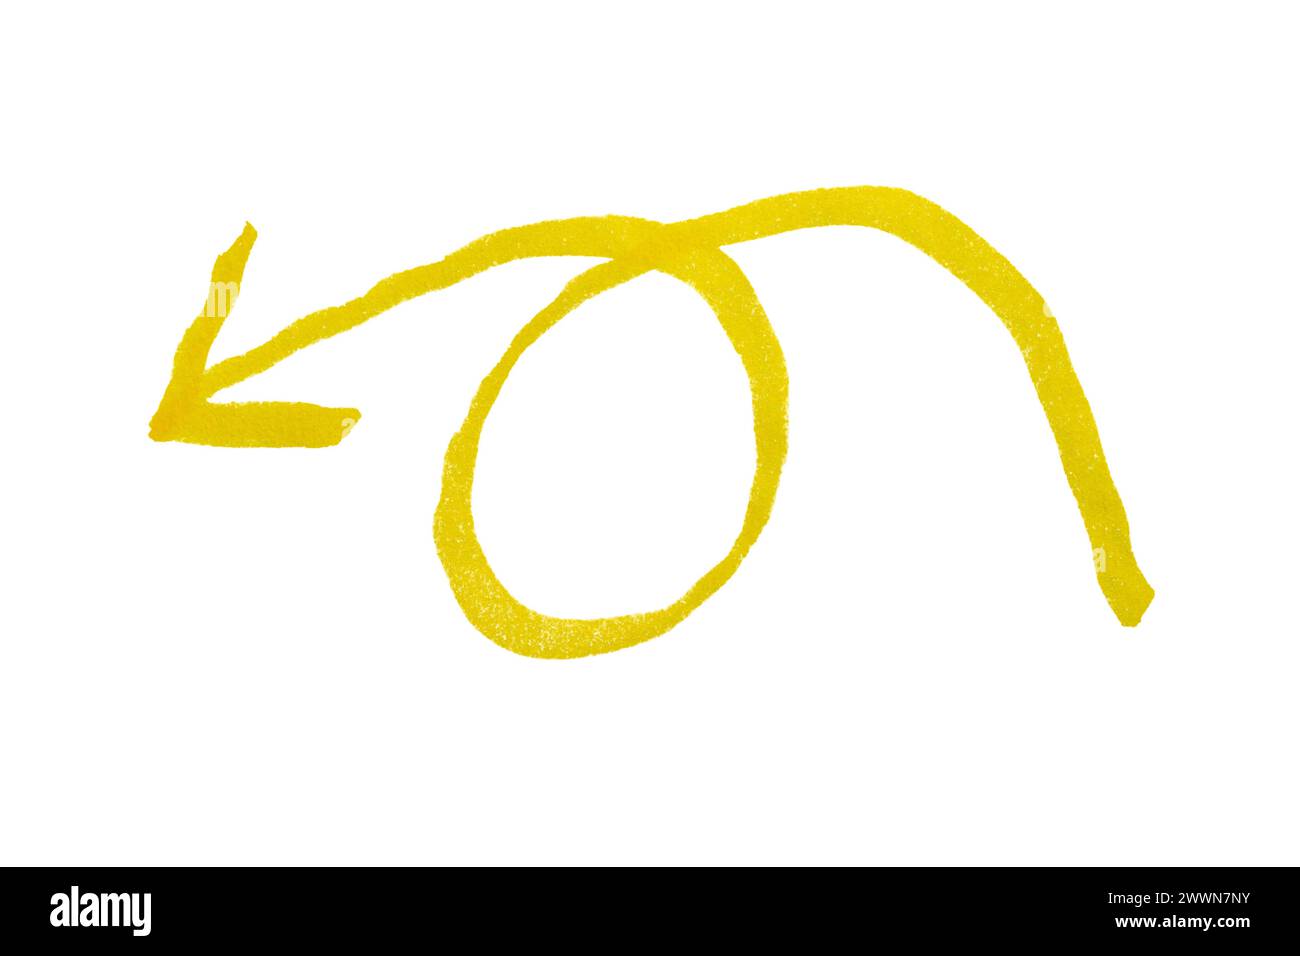 Hand drawn yellow arrow drawn with marker pen on white background Stock Photo